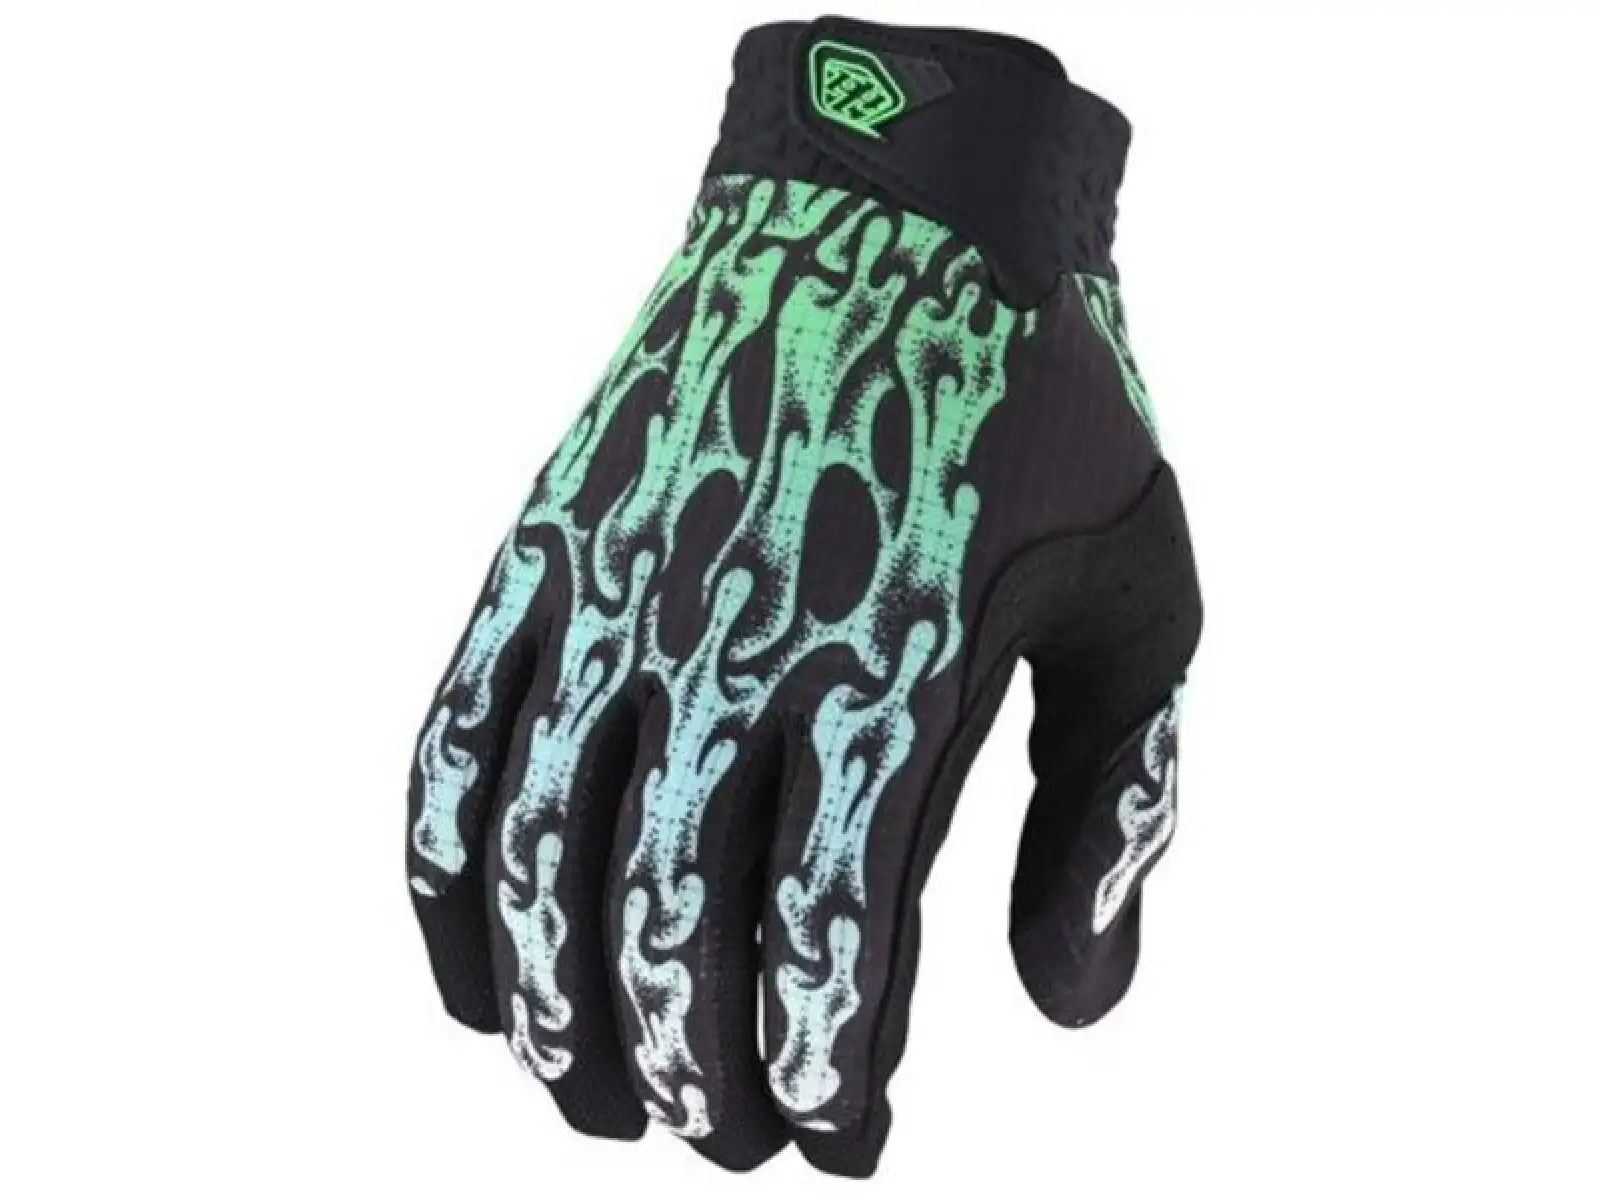 Troy Lee Designs Air rukavice Slime Hands/Flo Green